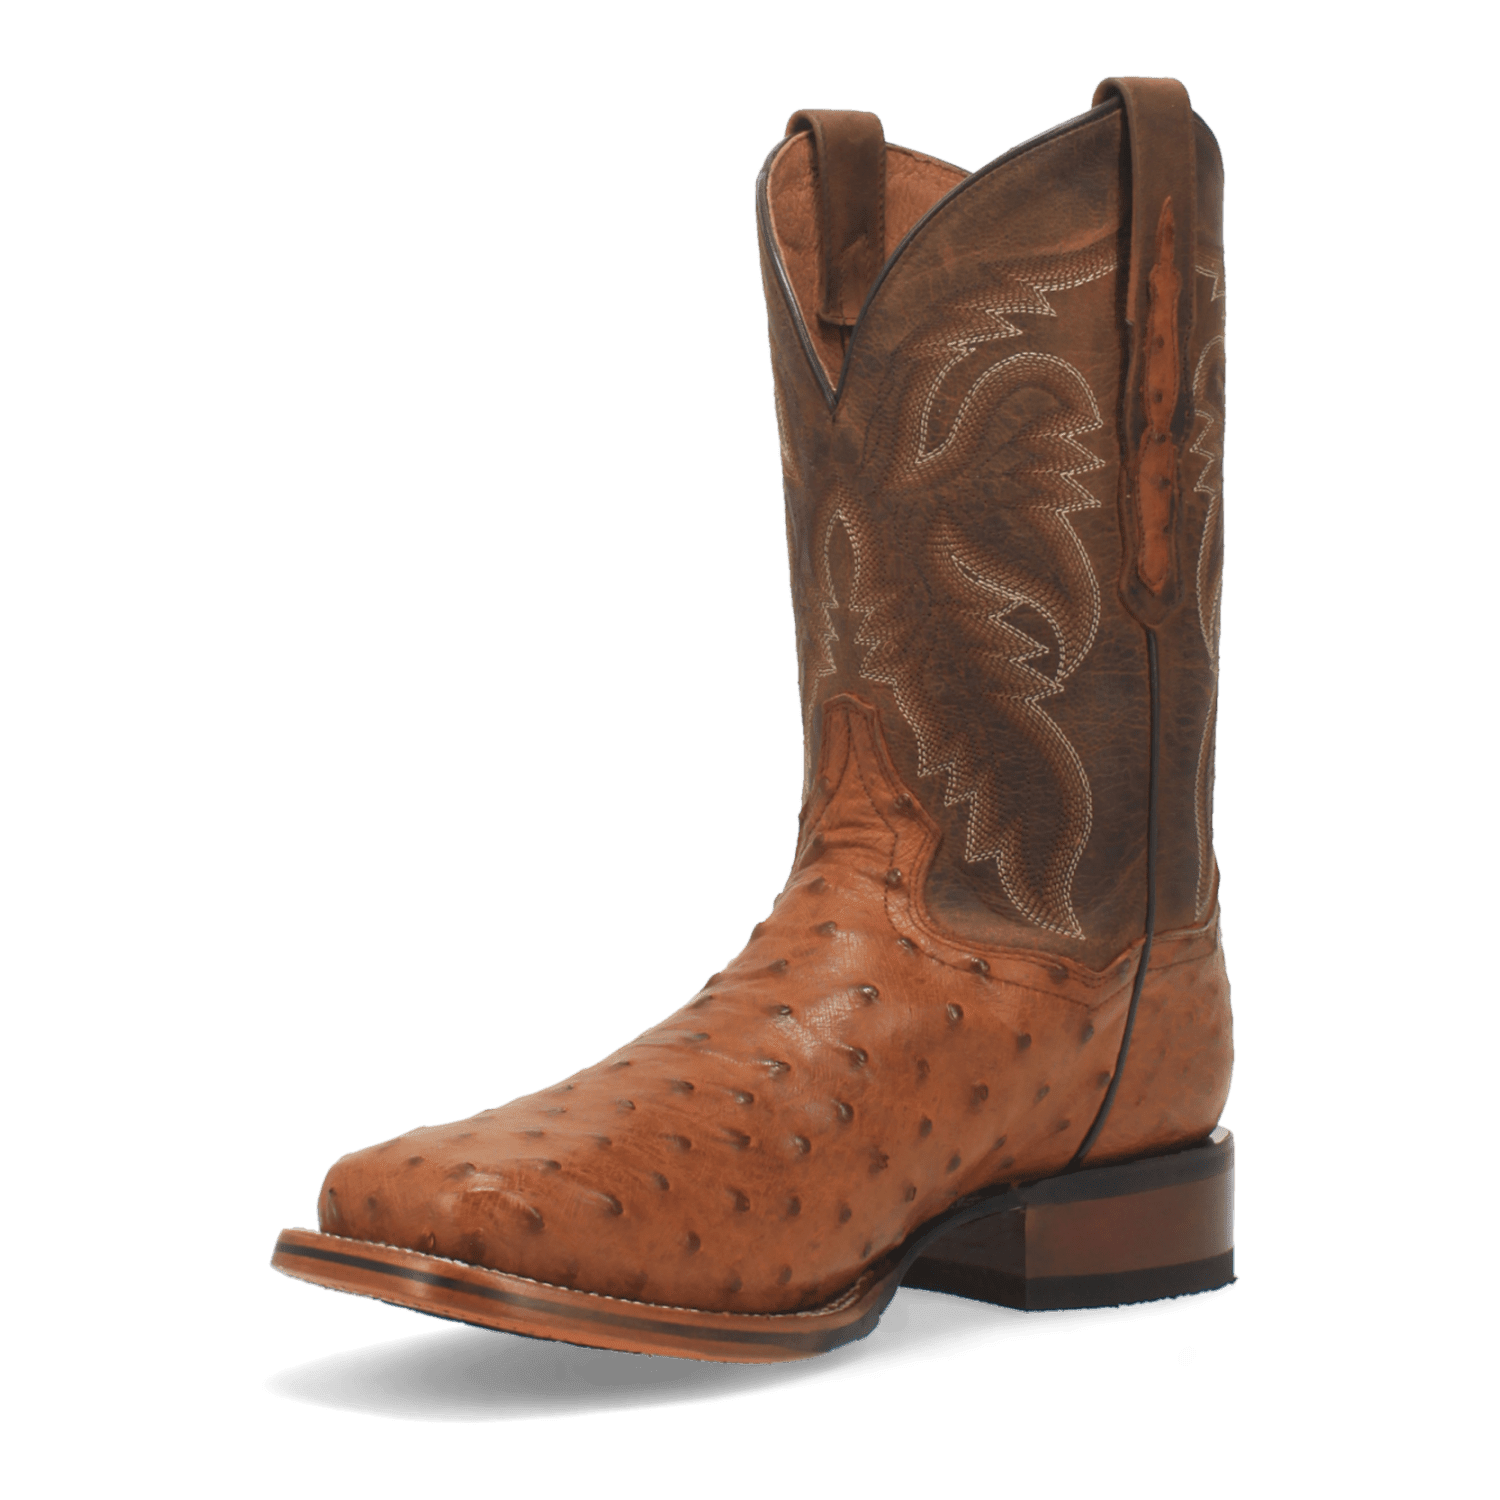 ALAMOSA FULL QUILL OSTRICH BOOT Image